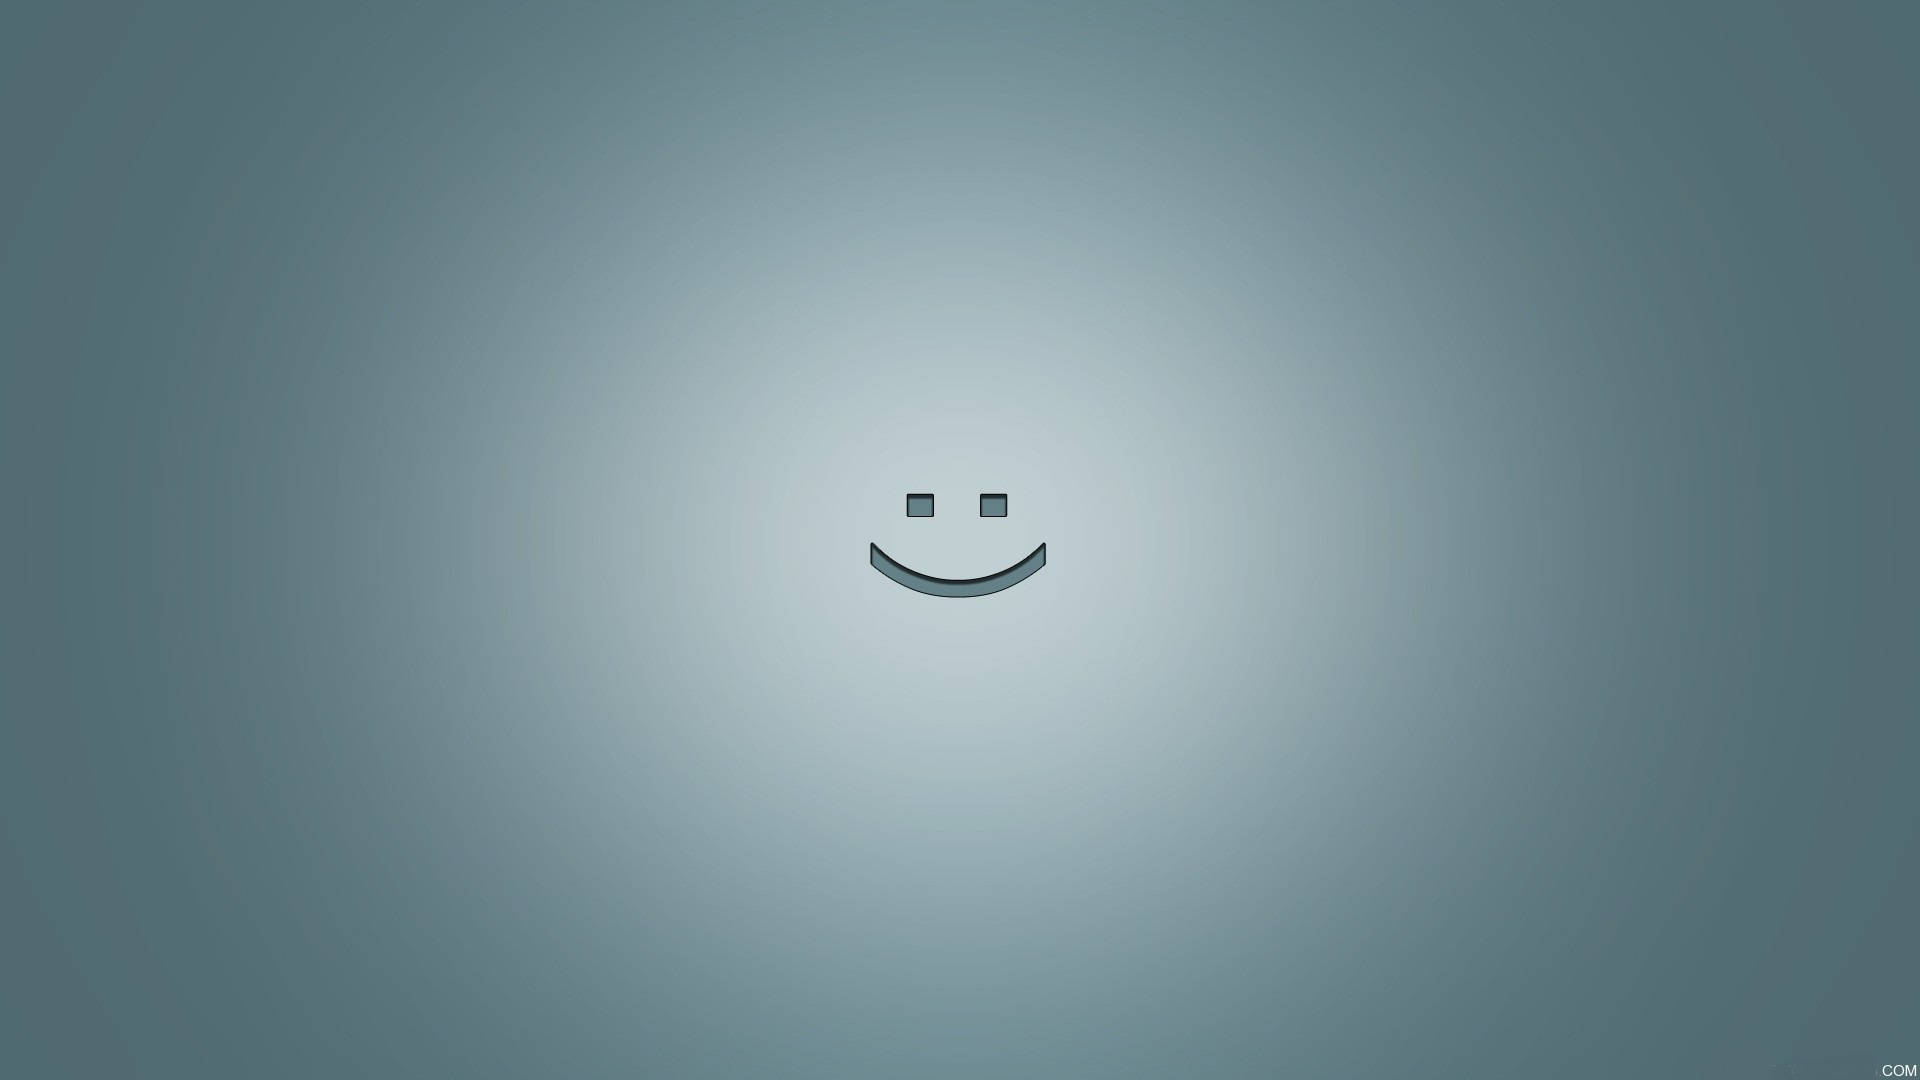 Smiley Face On Gray Gradient Background Wallpaper